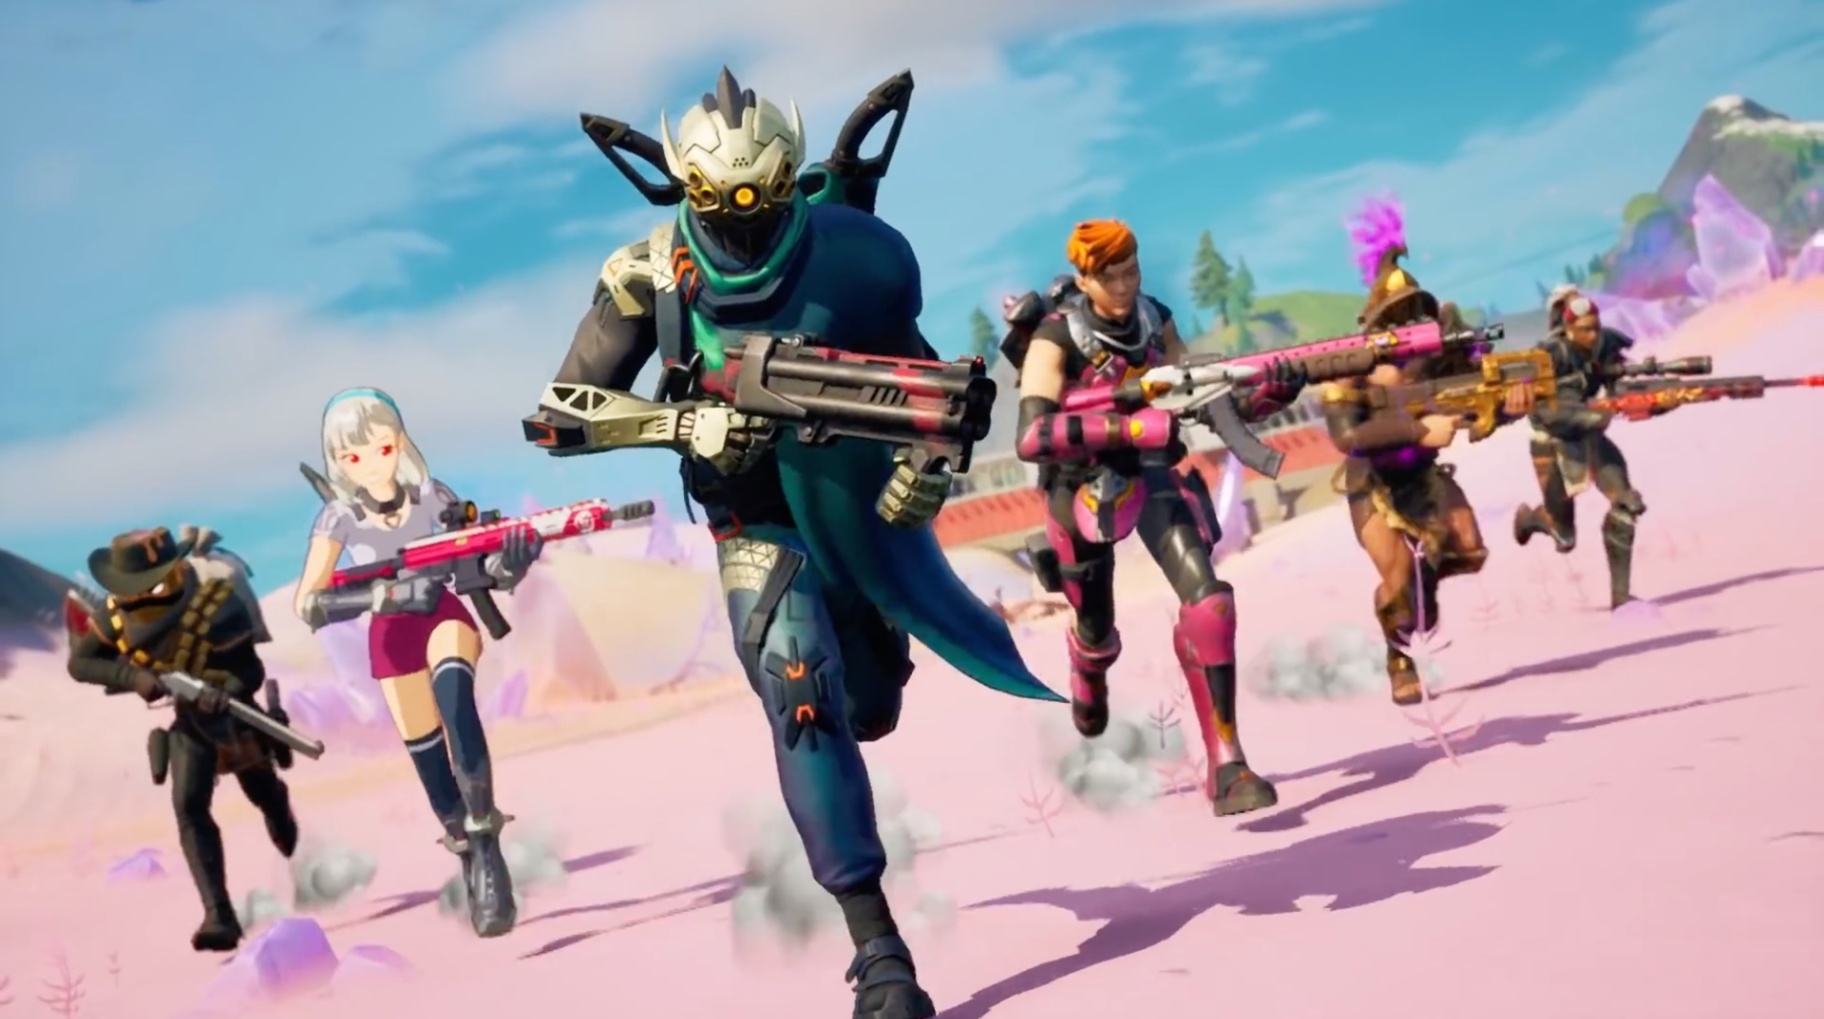 Check Out the Best Tips for Completing Fortnite Challenges